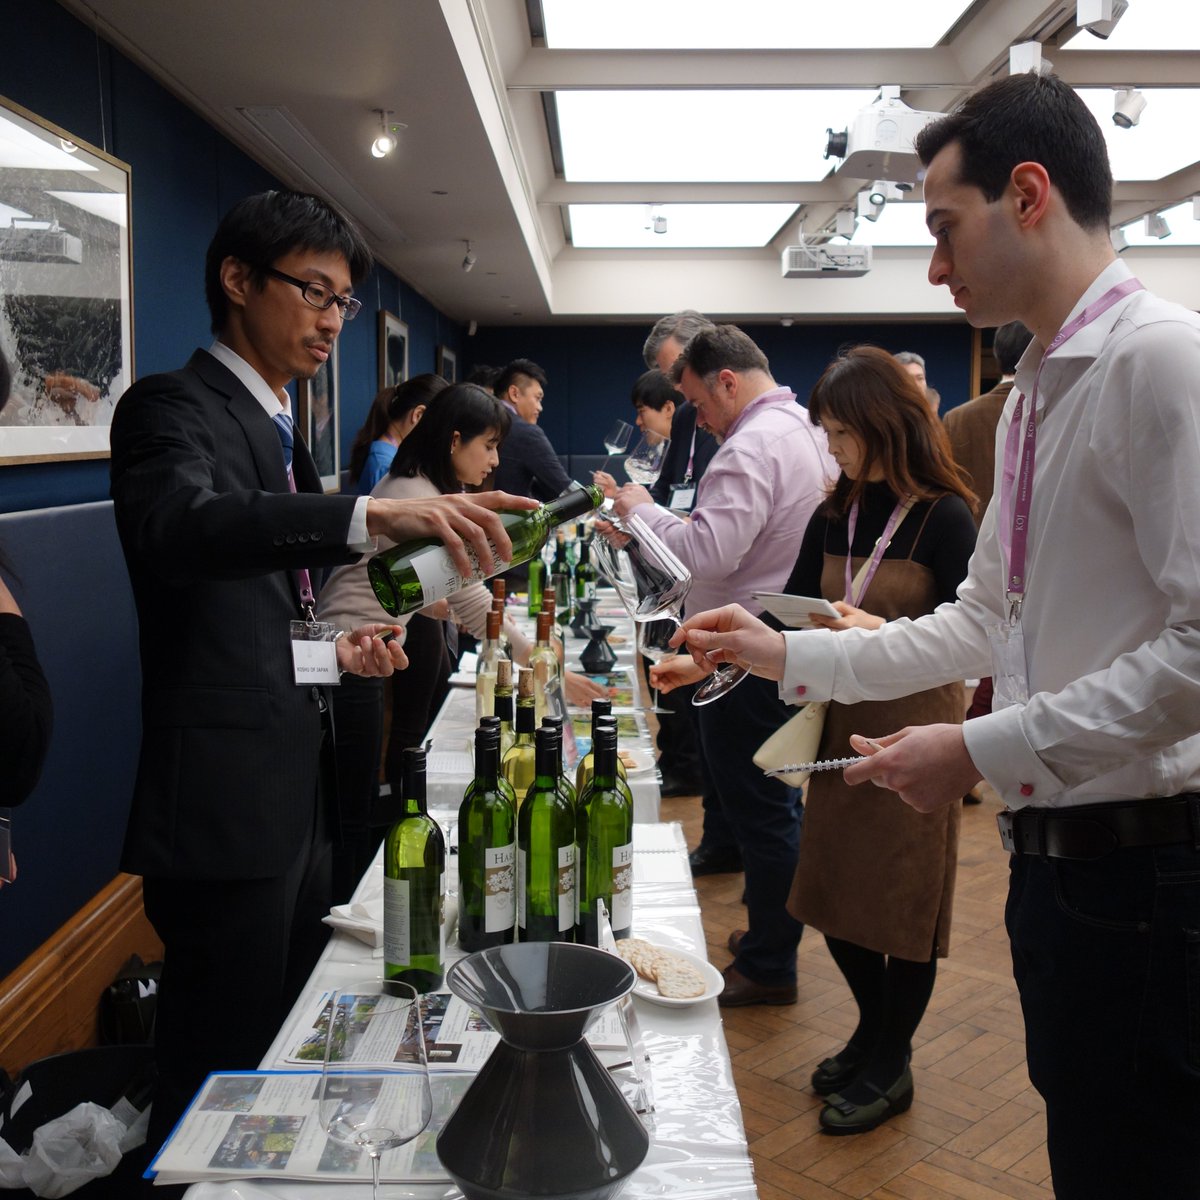 There’s still a chance for trade to sign up for the #Koshu tasting @67PallMall – stunning wines at the ready for tomorrow’s tasting! koshuofjapan.jp